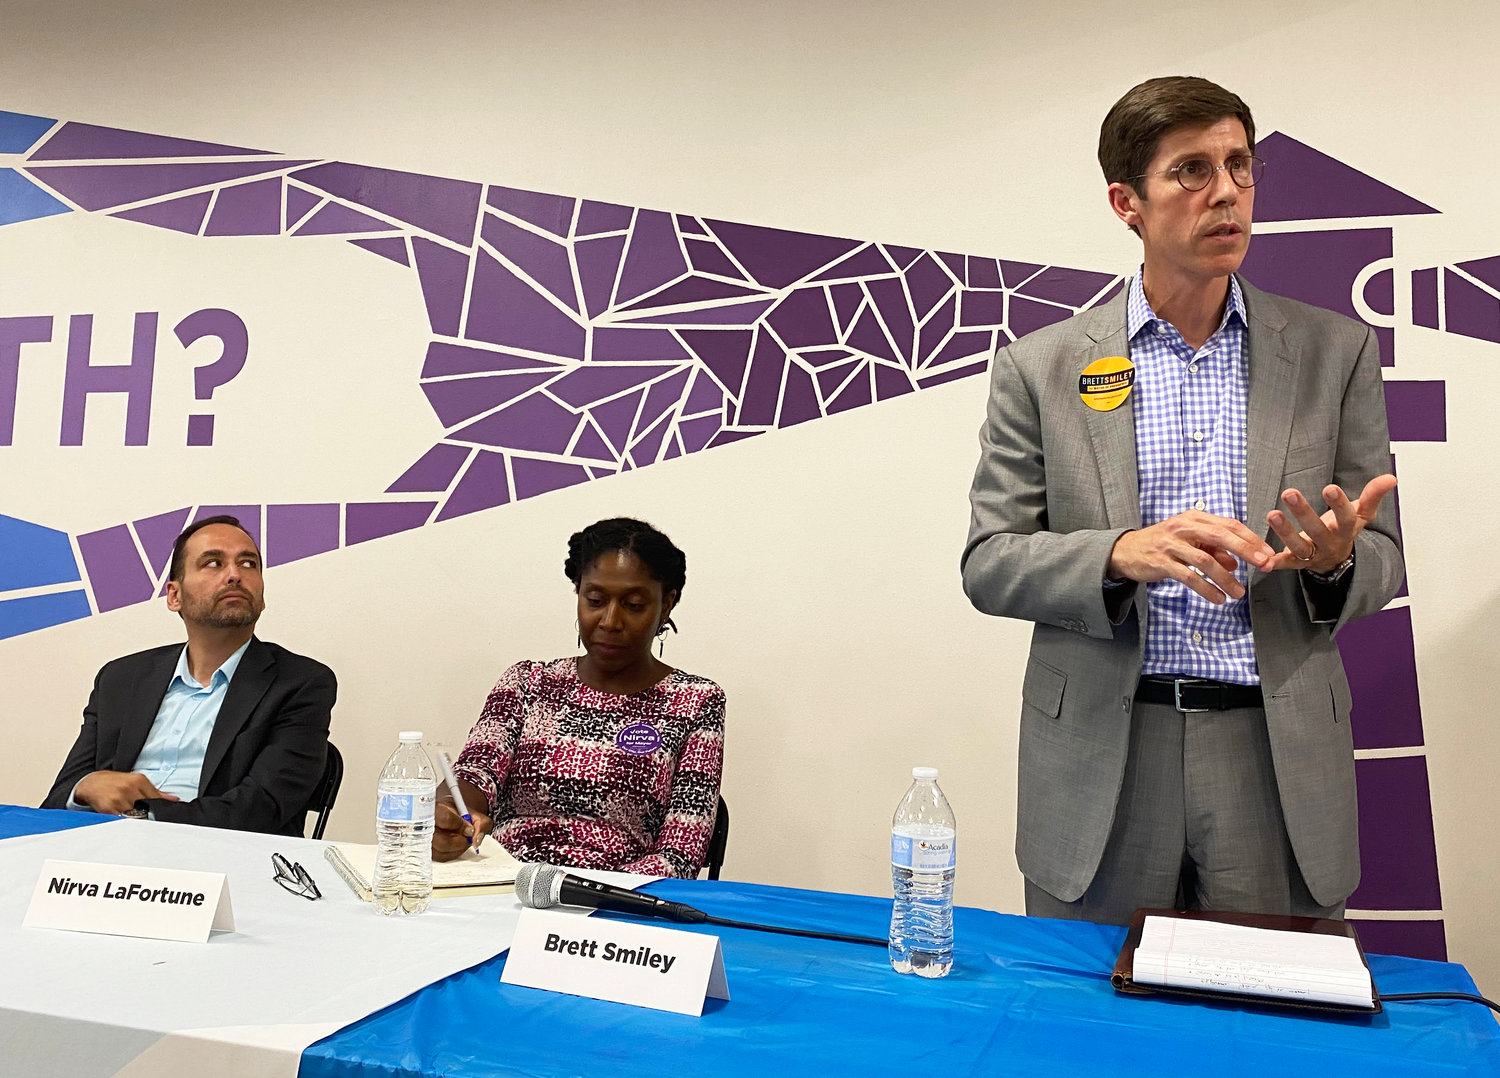 Brett Smiley, right, answers a question at the Aug. 4 Mayoral Forum at the Jim Gillen Teen Center, as candidates Gonzalo Cuervo, left, and Nirva LaFortune, center, listen.